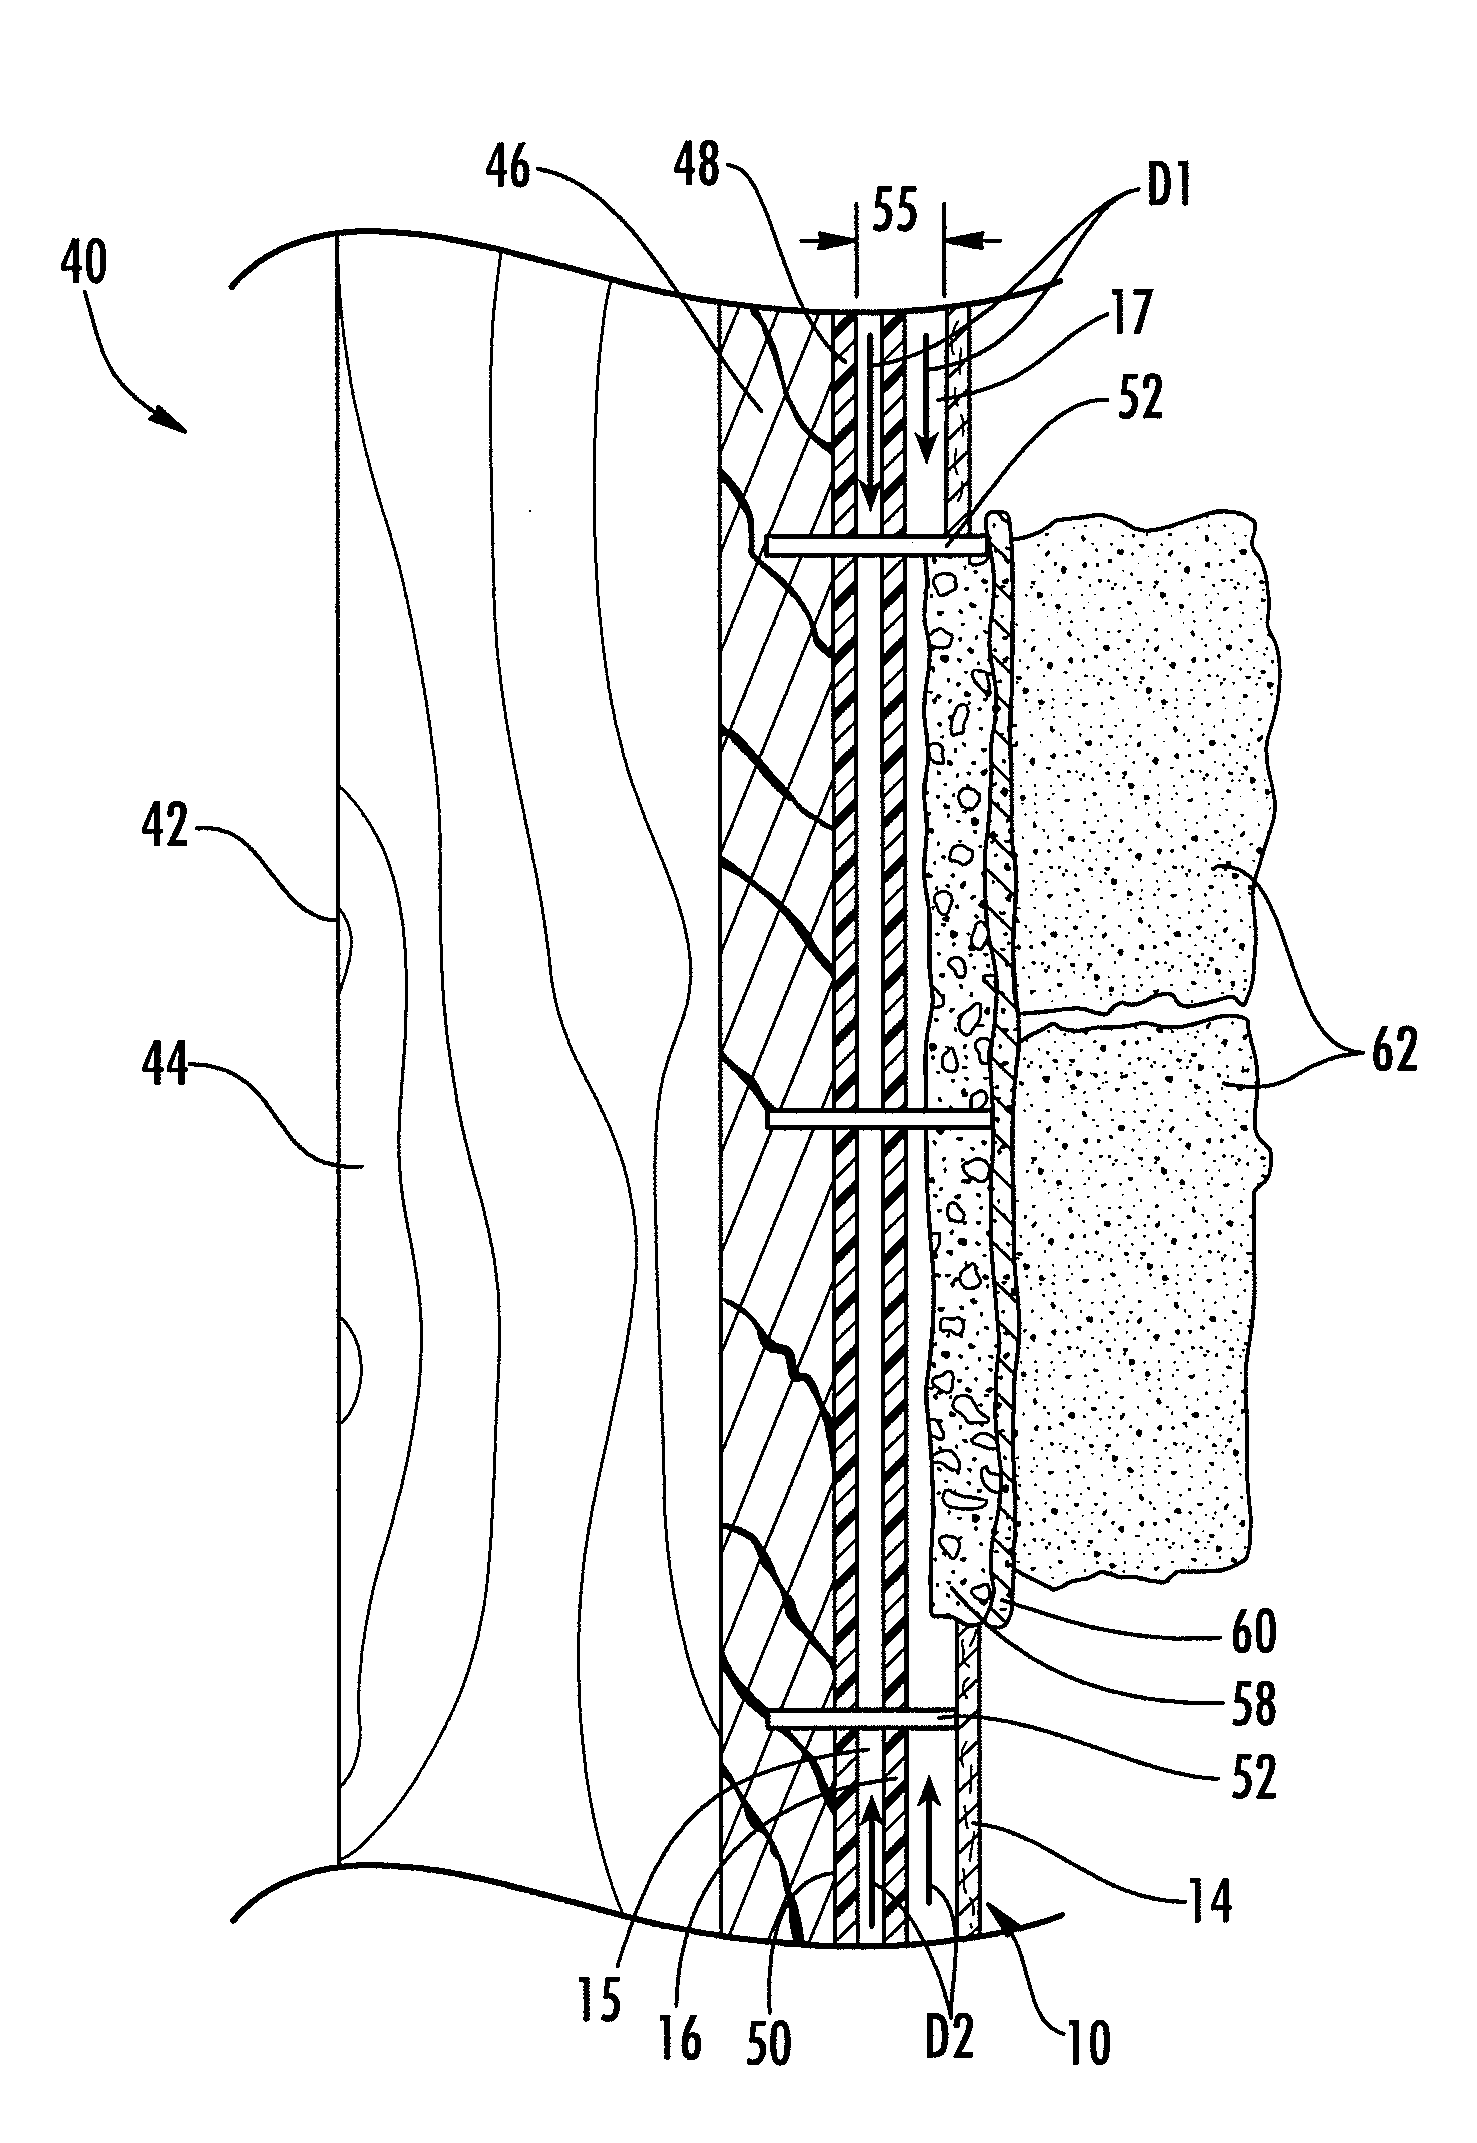 Apparatuses and Methods for an Improved Lath, Vapor Control Layer and Rain Screen Assembly